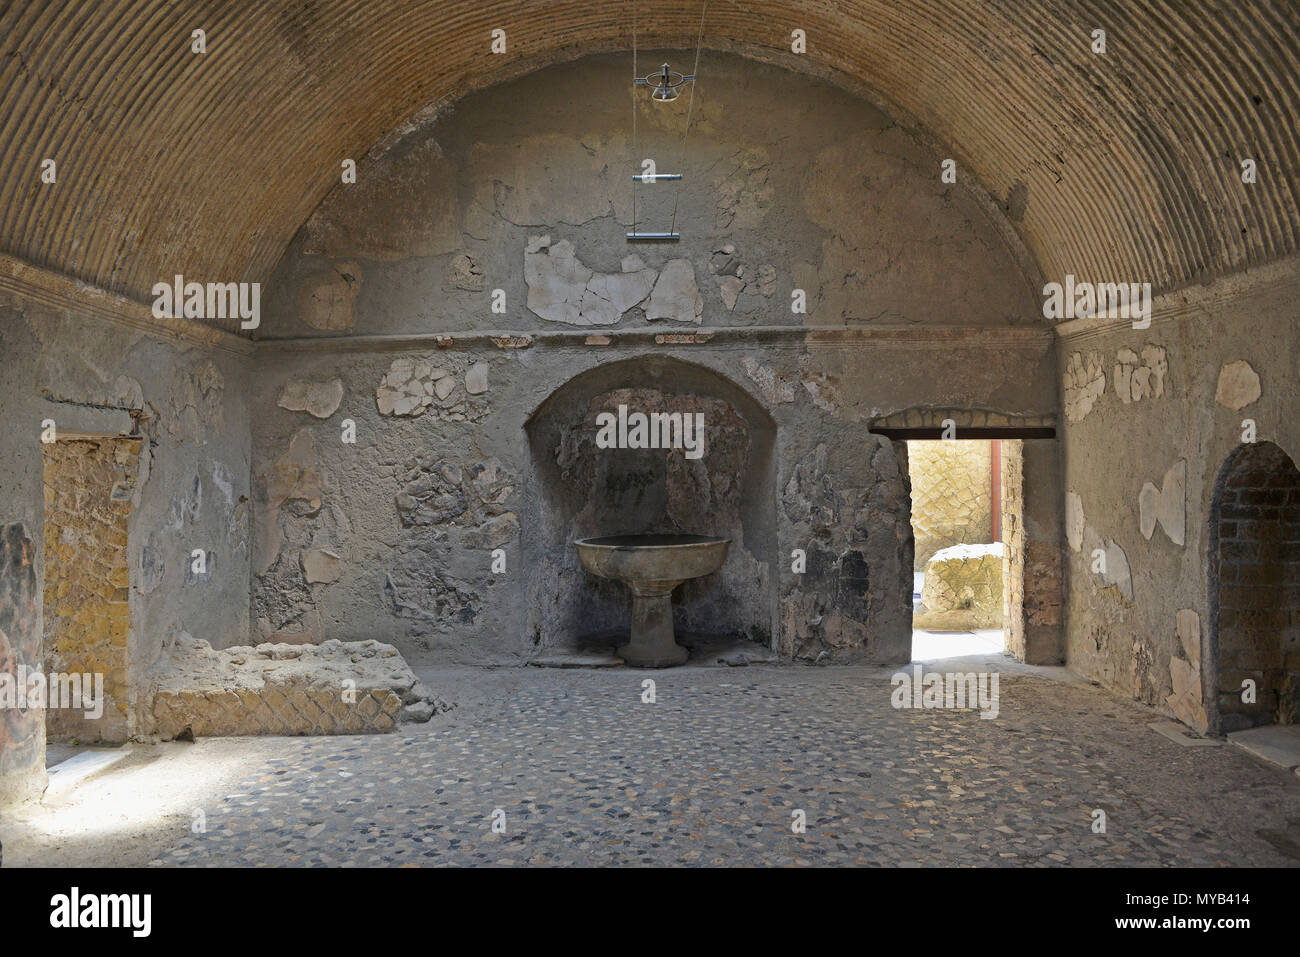 Interior of the public bath (central thermae), the apodyterium, at Herculaneum, showing vaulted ceiling and niche with a labrum of cipolin, Italy Stock Photo